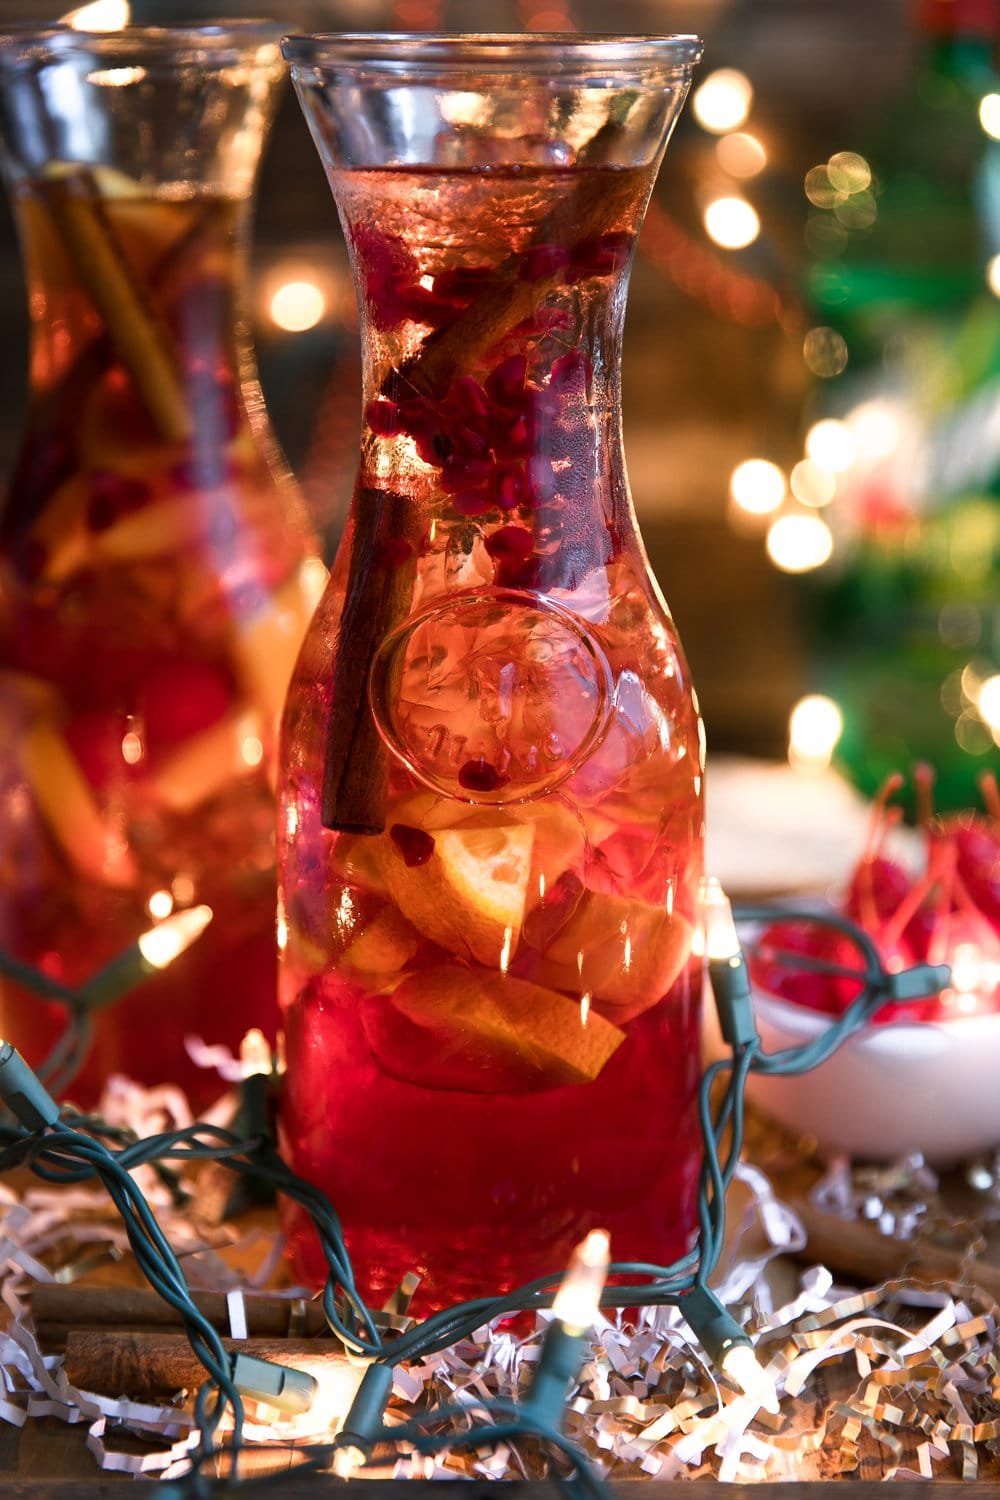 Cinnamon liqueur, bourbon, tart cherry juice, fresh orange wedges and sweet bubbly 7UP mix together to make this Orange and Cherry 7UP Spritzer; a delicious holiday cocktail